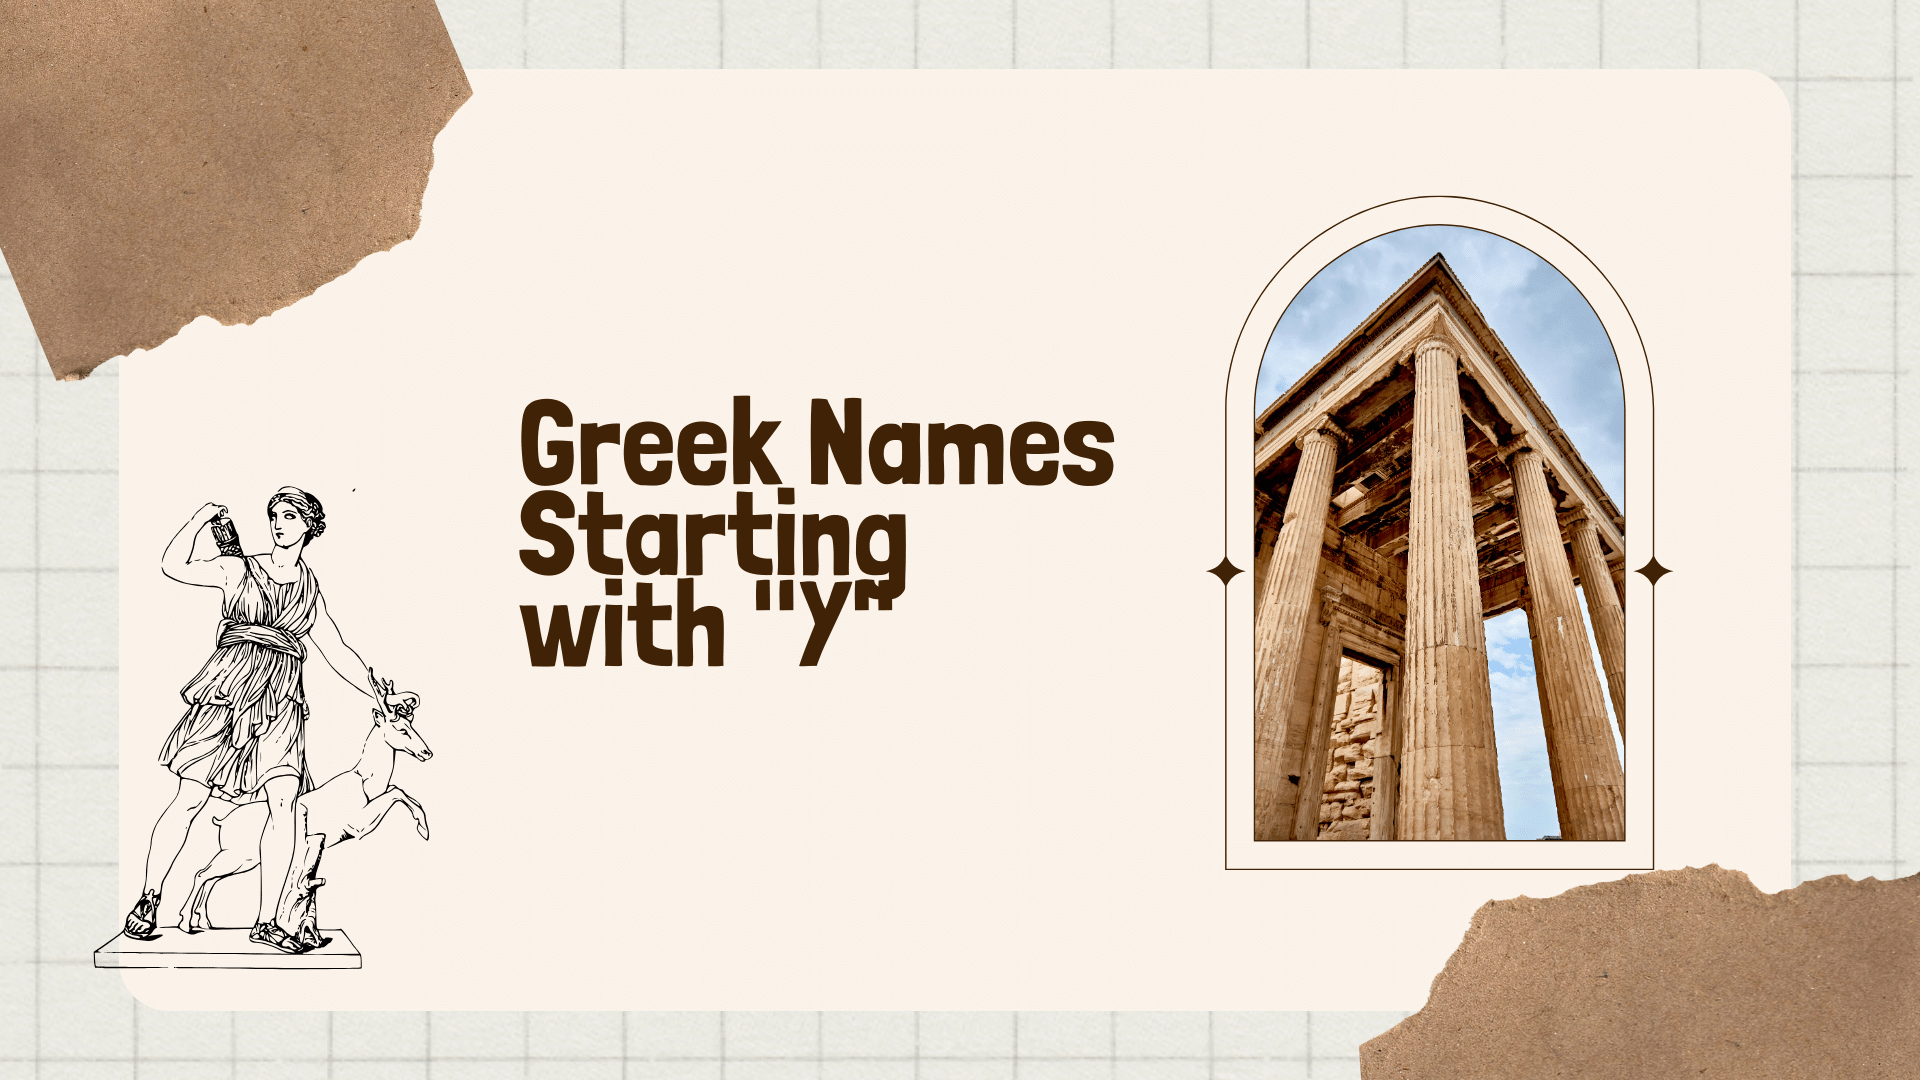 Greek Names Starting With "Y"